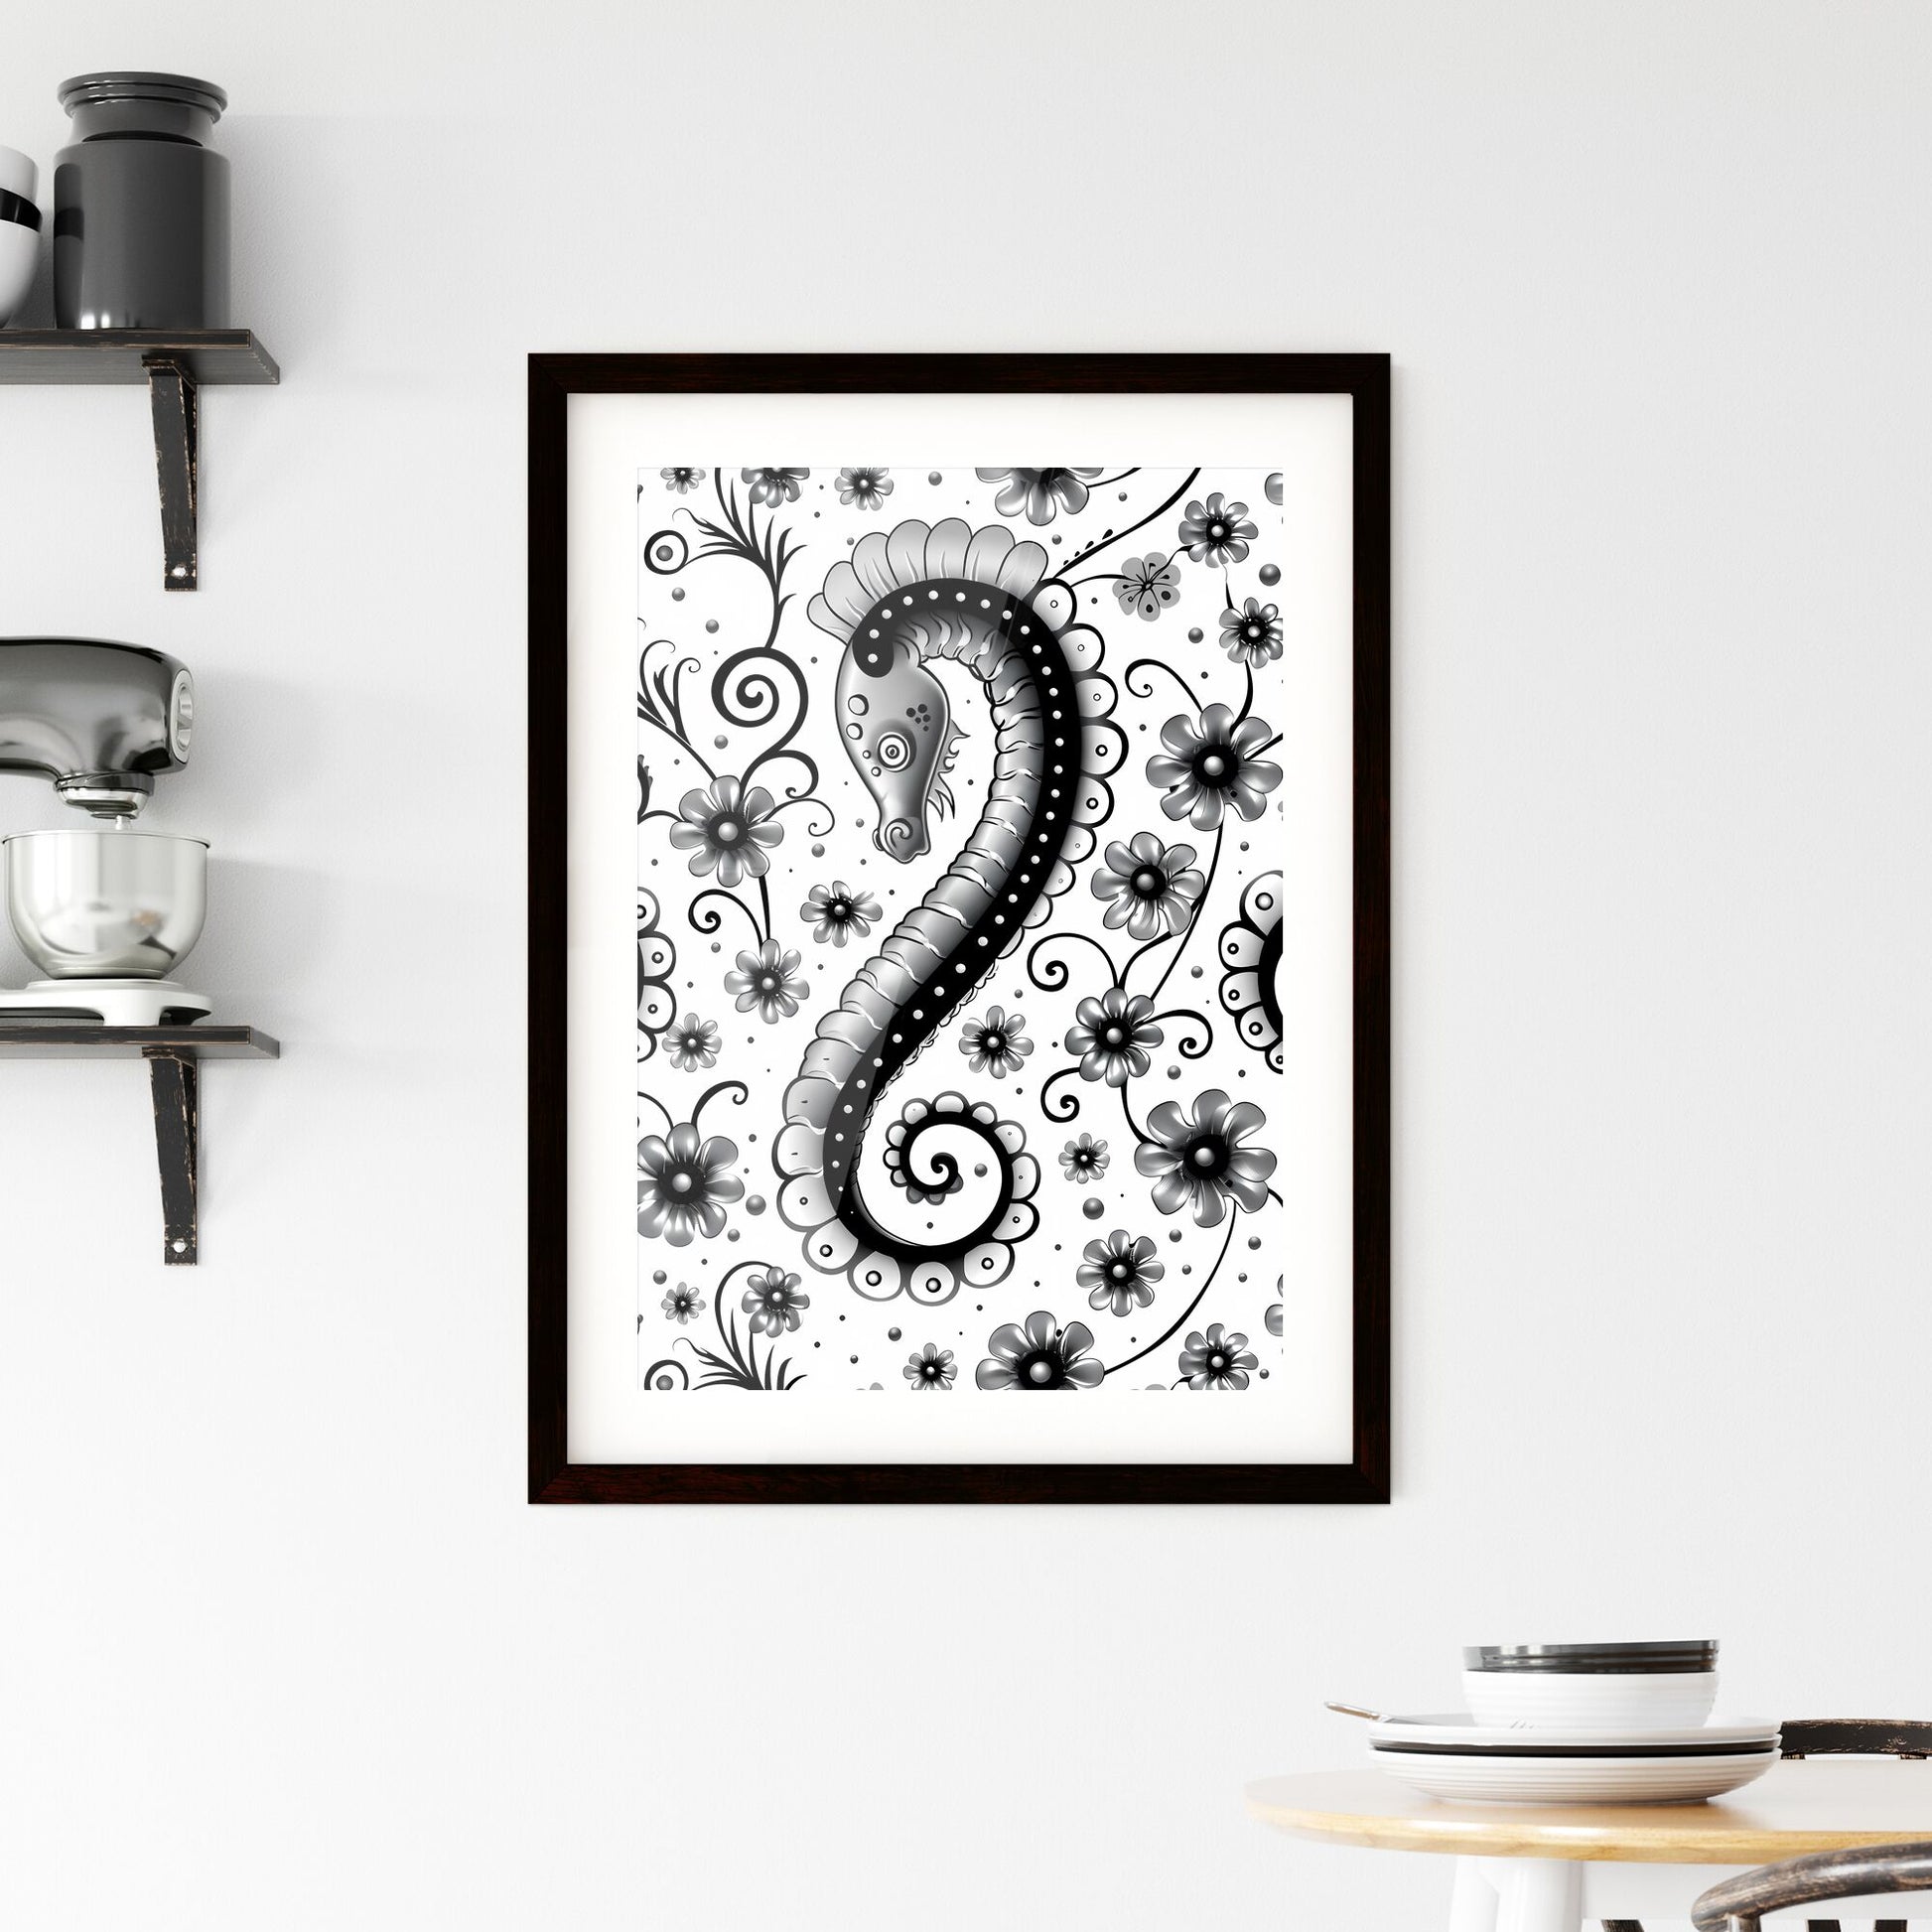 Whimsical Black and White Kid-Themed Art Painting Background with Flowers and Seahorse Default Title